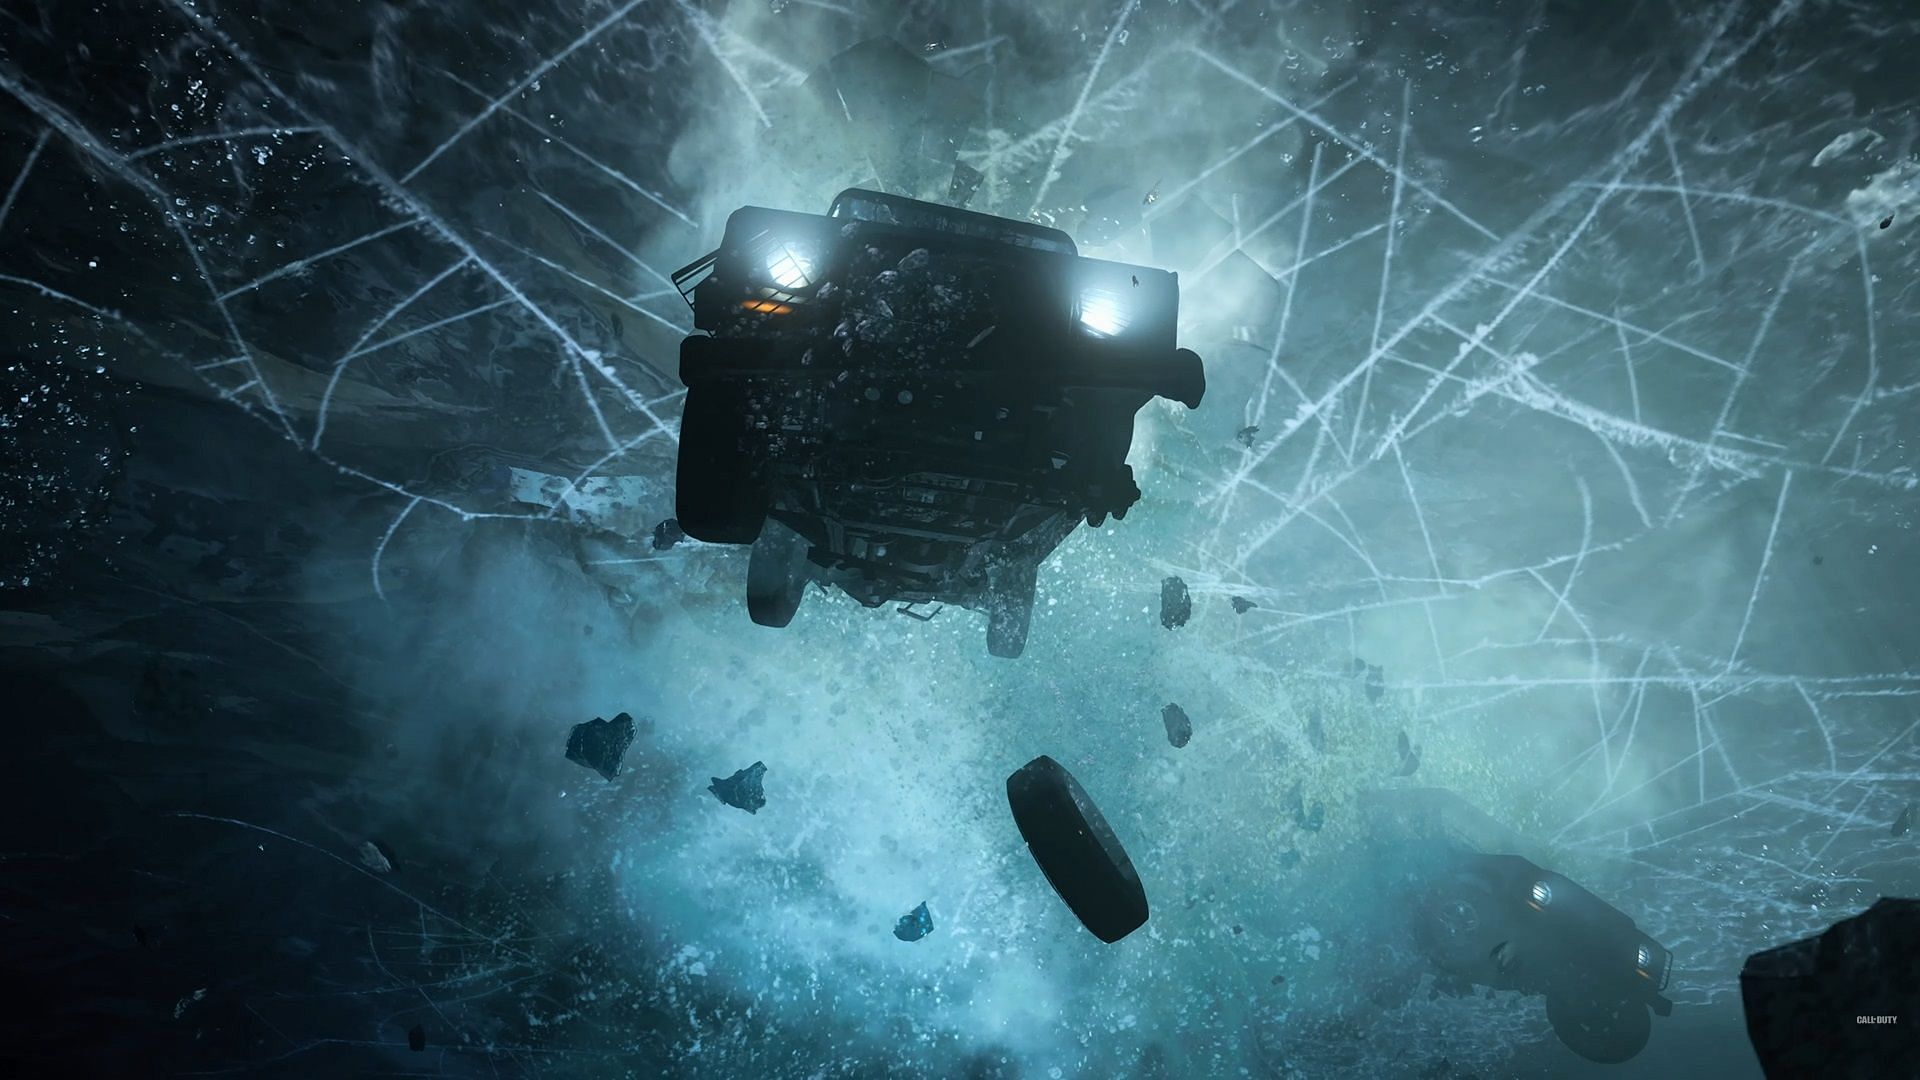 Breakable ice sheet in Modern Warfare 3 (Image via Activision)